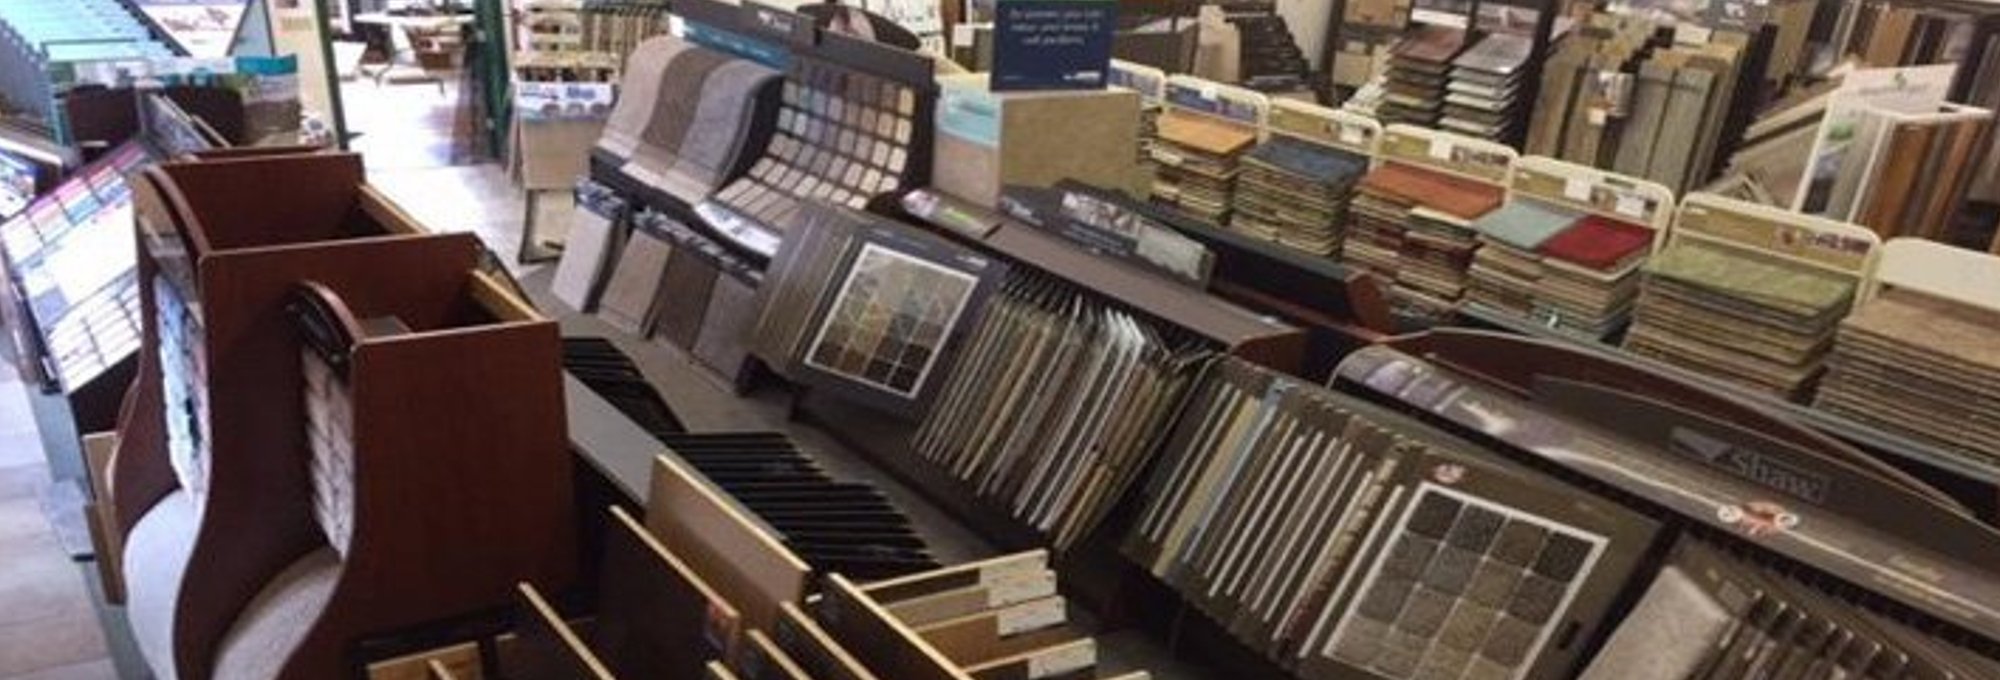 mcmillens carpet showroom from McMillen's Carpet Outlet in Clarion